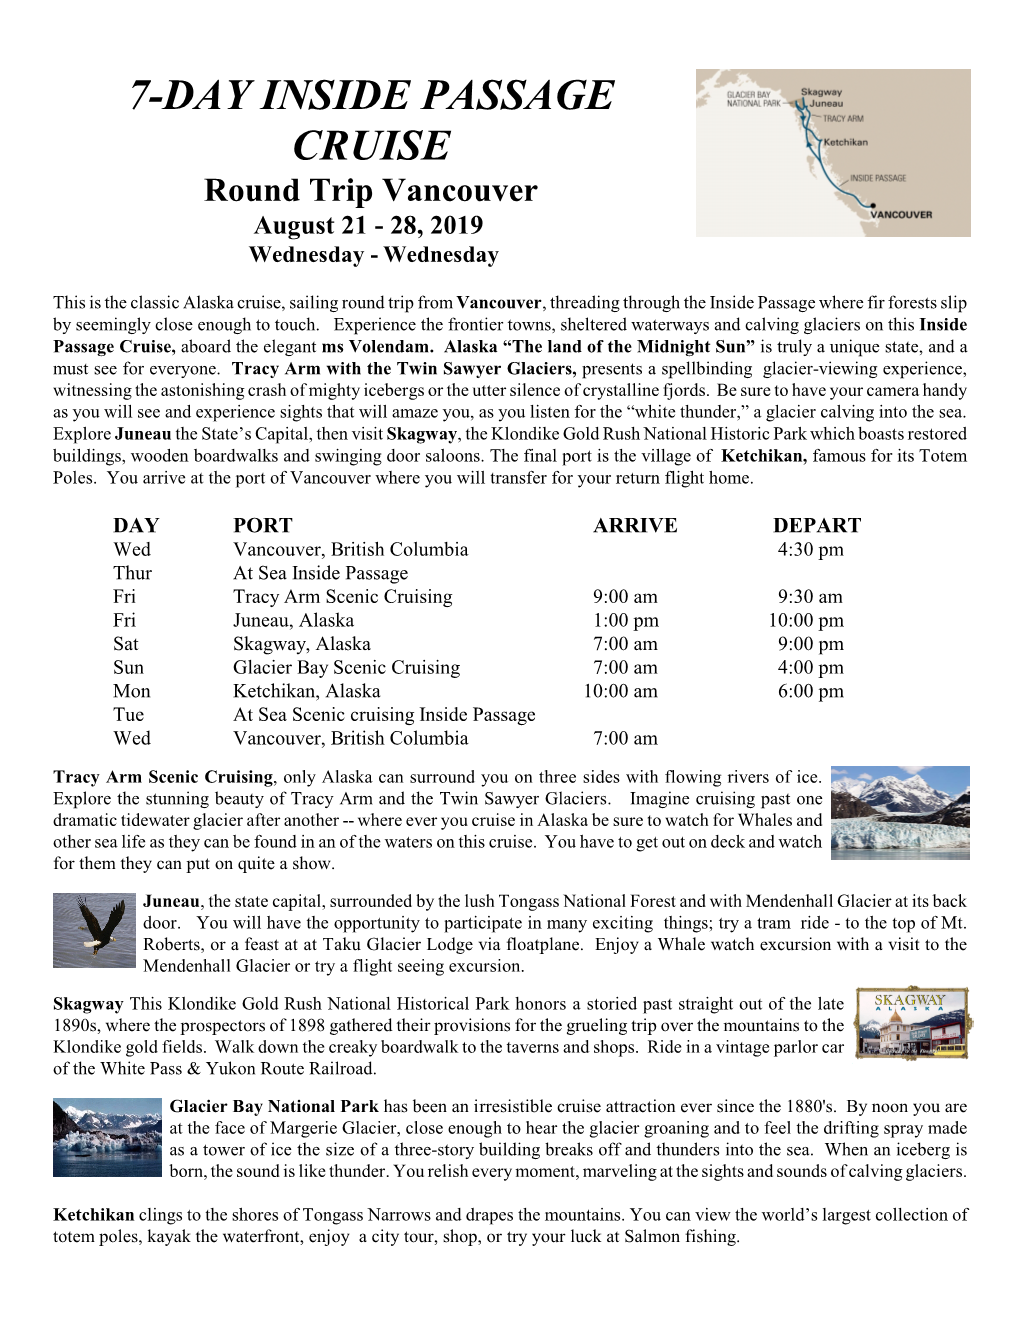 7-DAY INSIDE PASSAGE CRUISE Round Trip Vancouver August 21 - 28, 2019 Wednesday - Wednesday